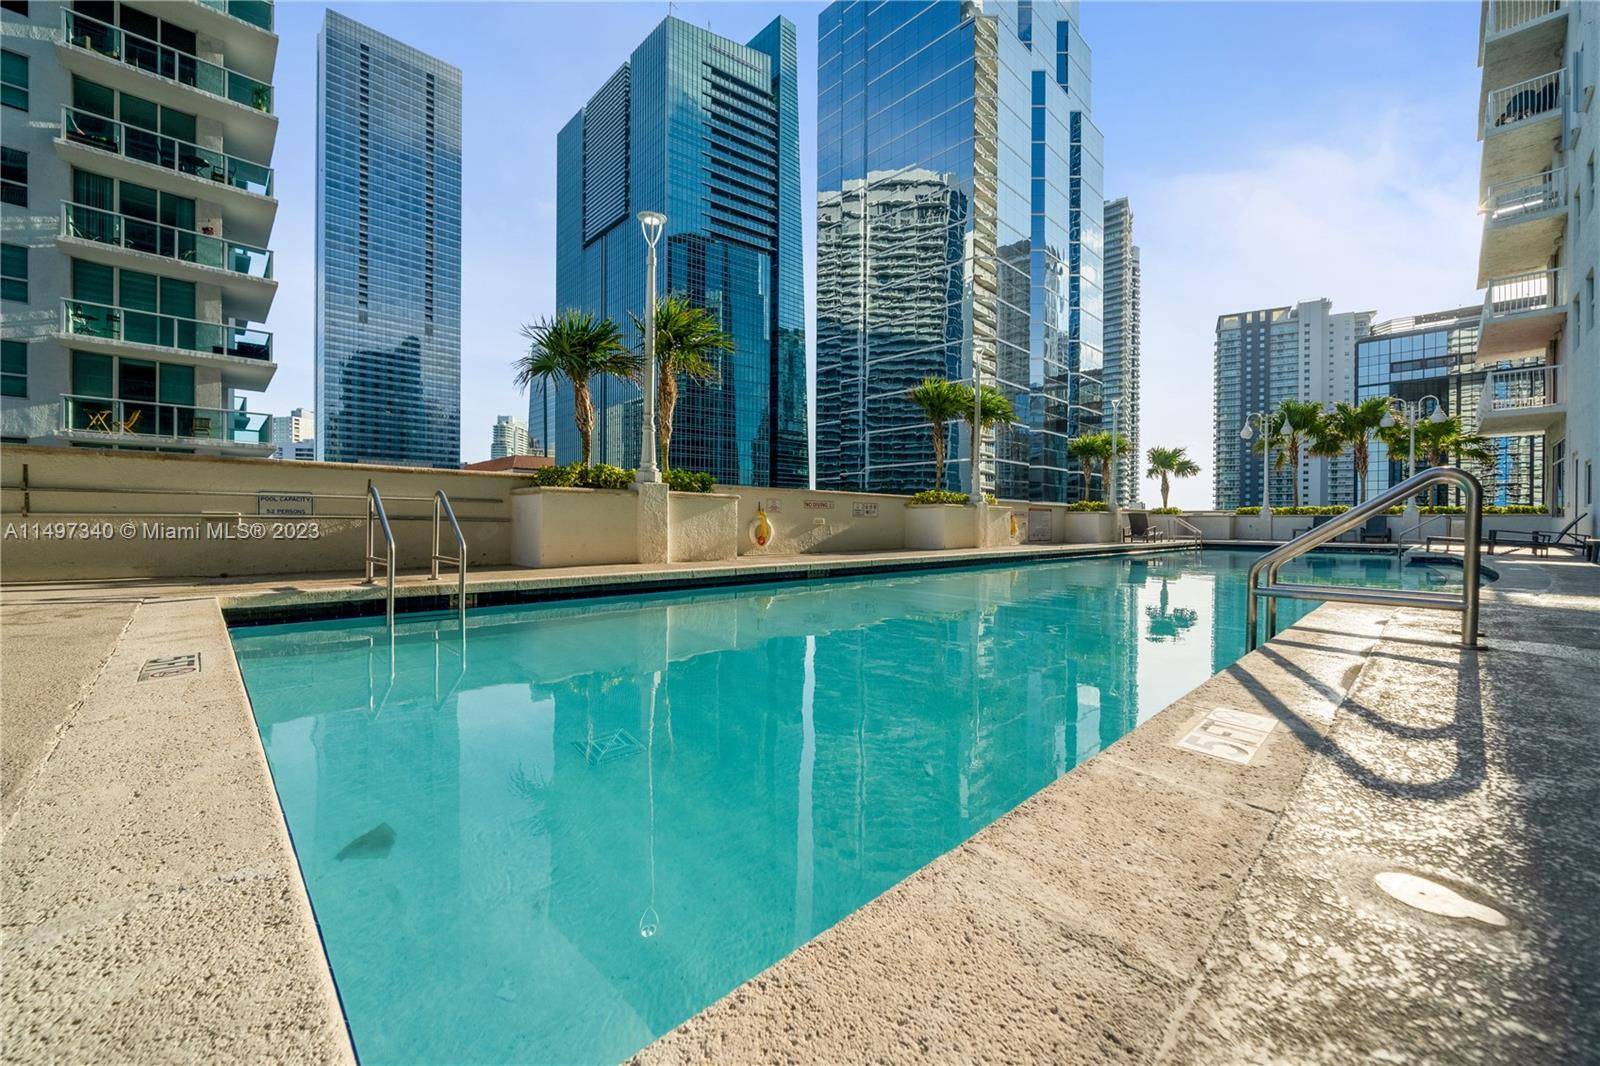 Welcome to Cloud 9, a charming one bedroom apartment in the heart of Brickell.